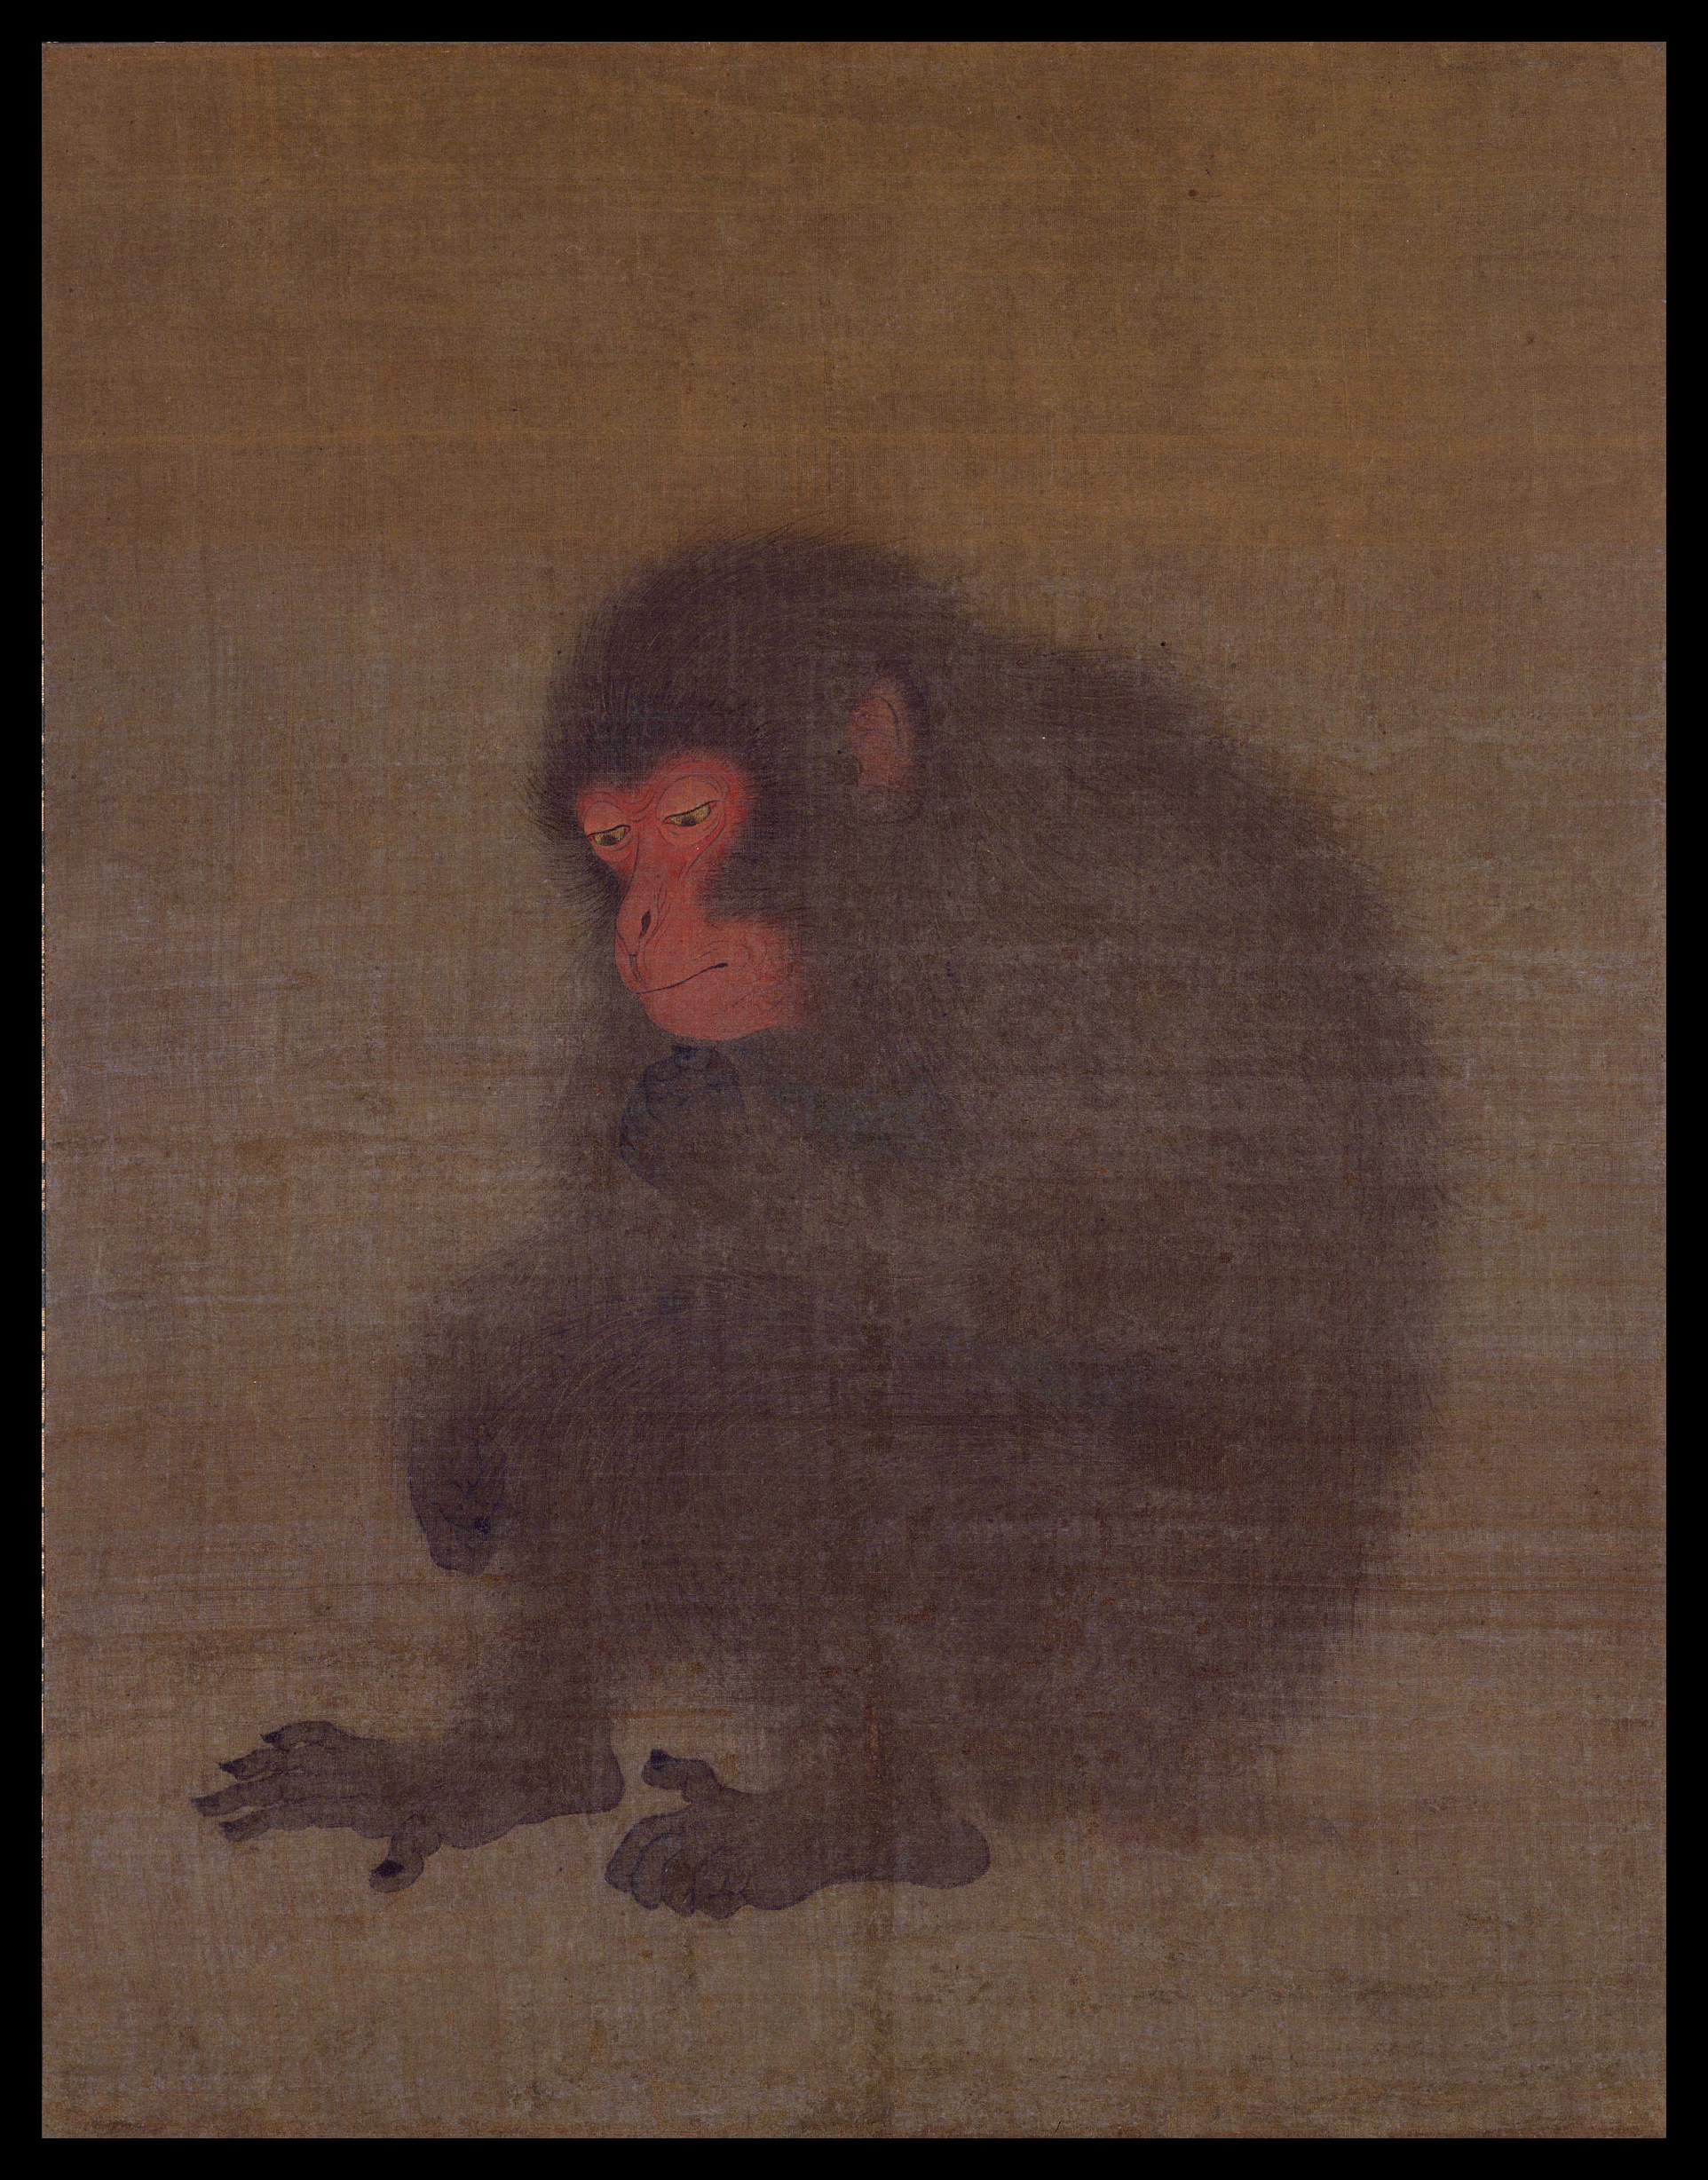 A Monkey by Mao Song - 2nd quarter 12th century - 47.1 x 36.7 cm Tokyo National Museum